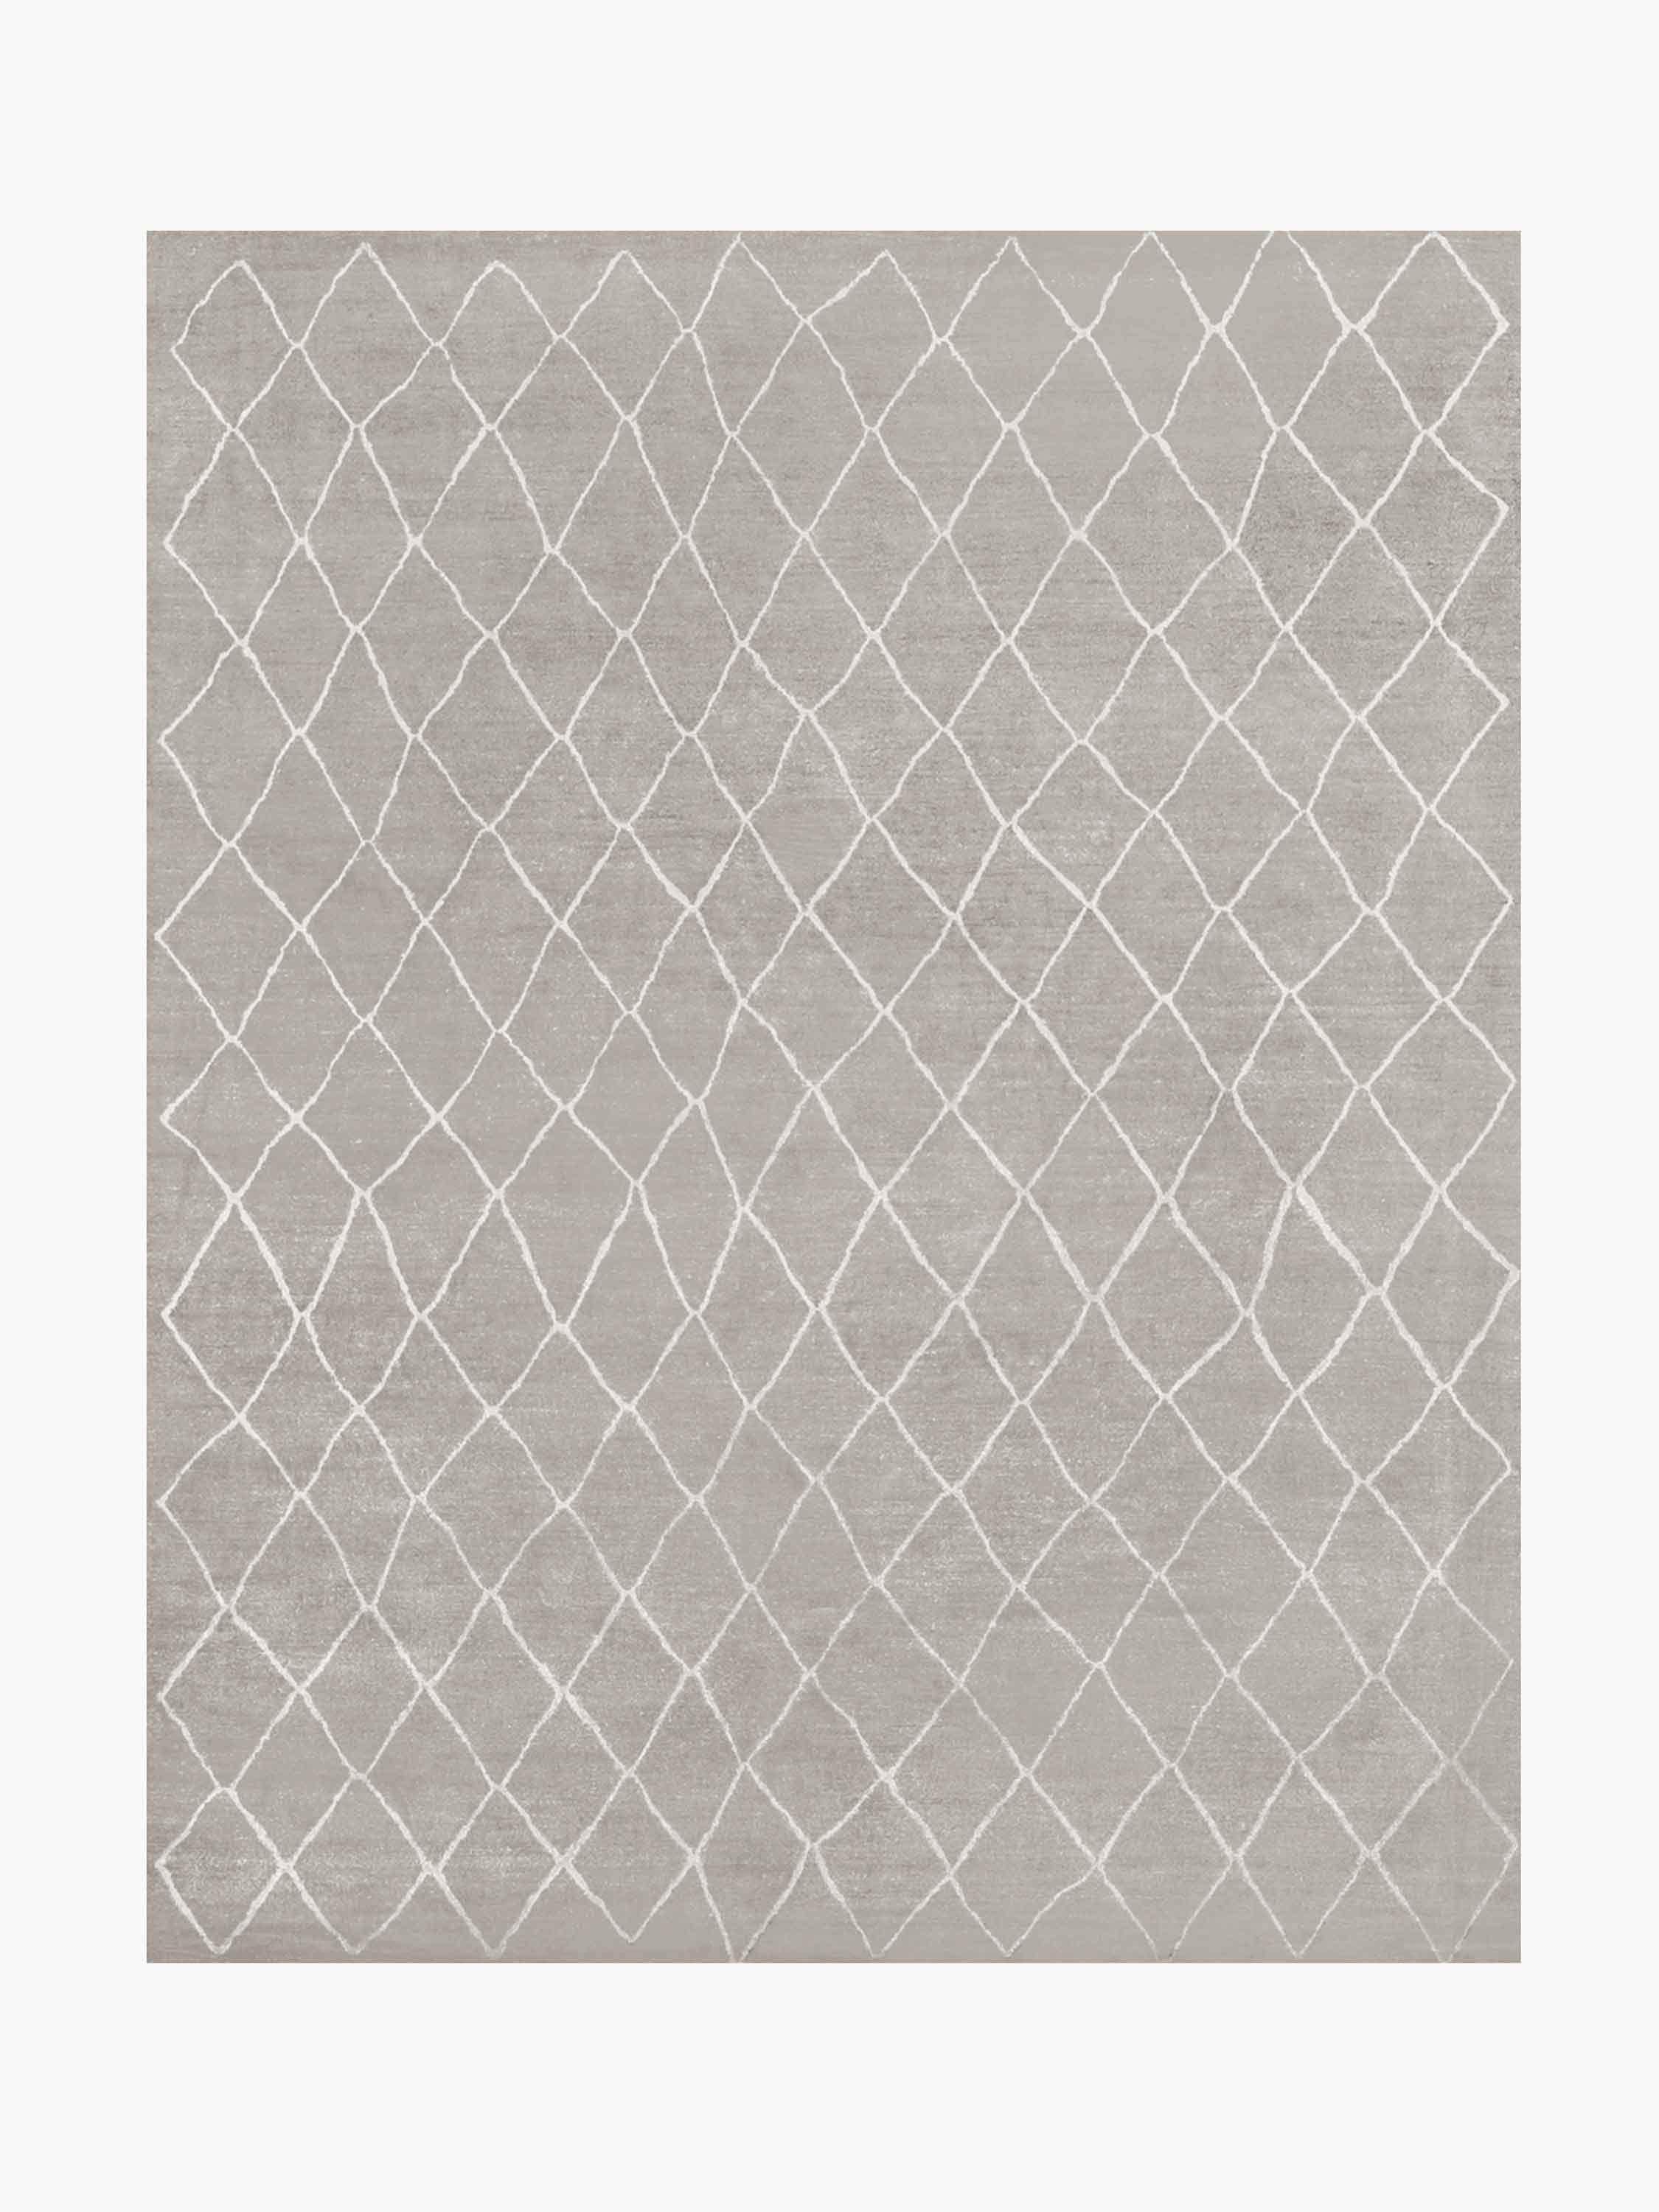 For Sale: Gray Ben Soleimani Arlequin Rug– Ultra-plush Hand-knotted Viscose Charcoal 8'x10'